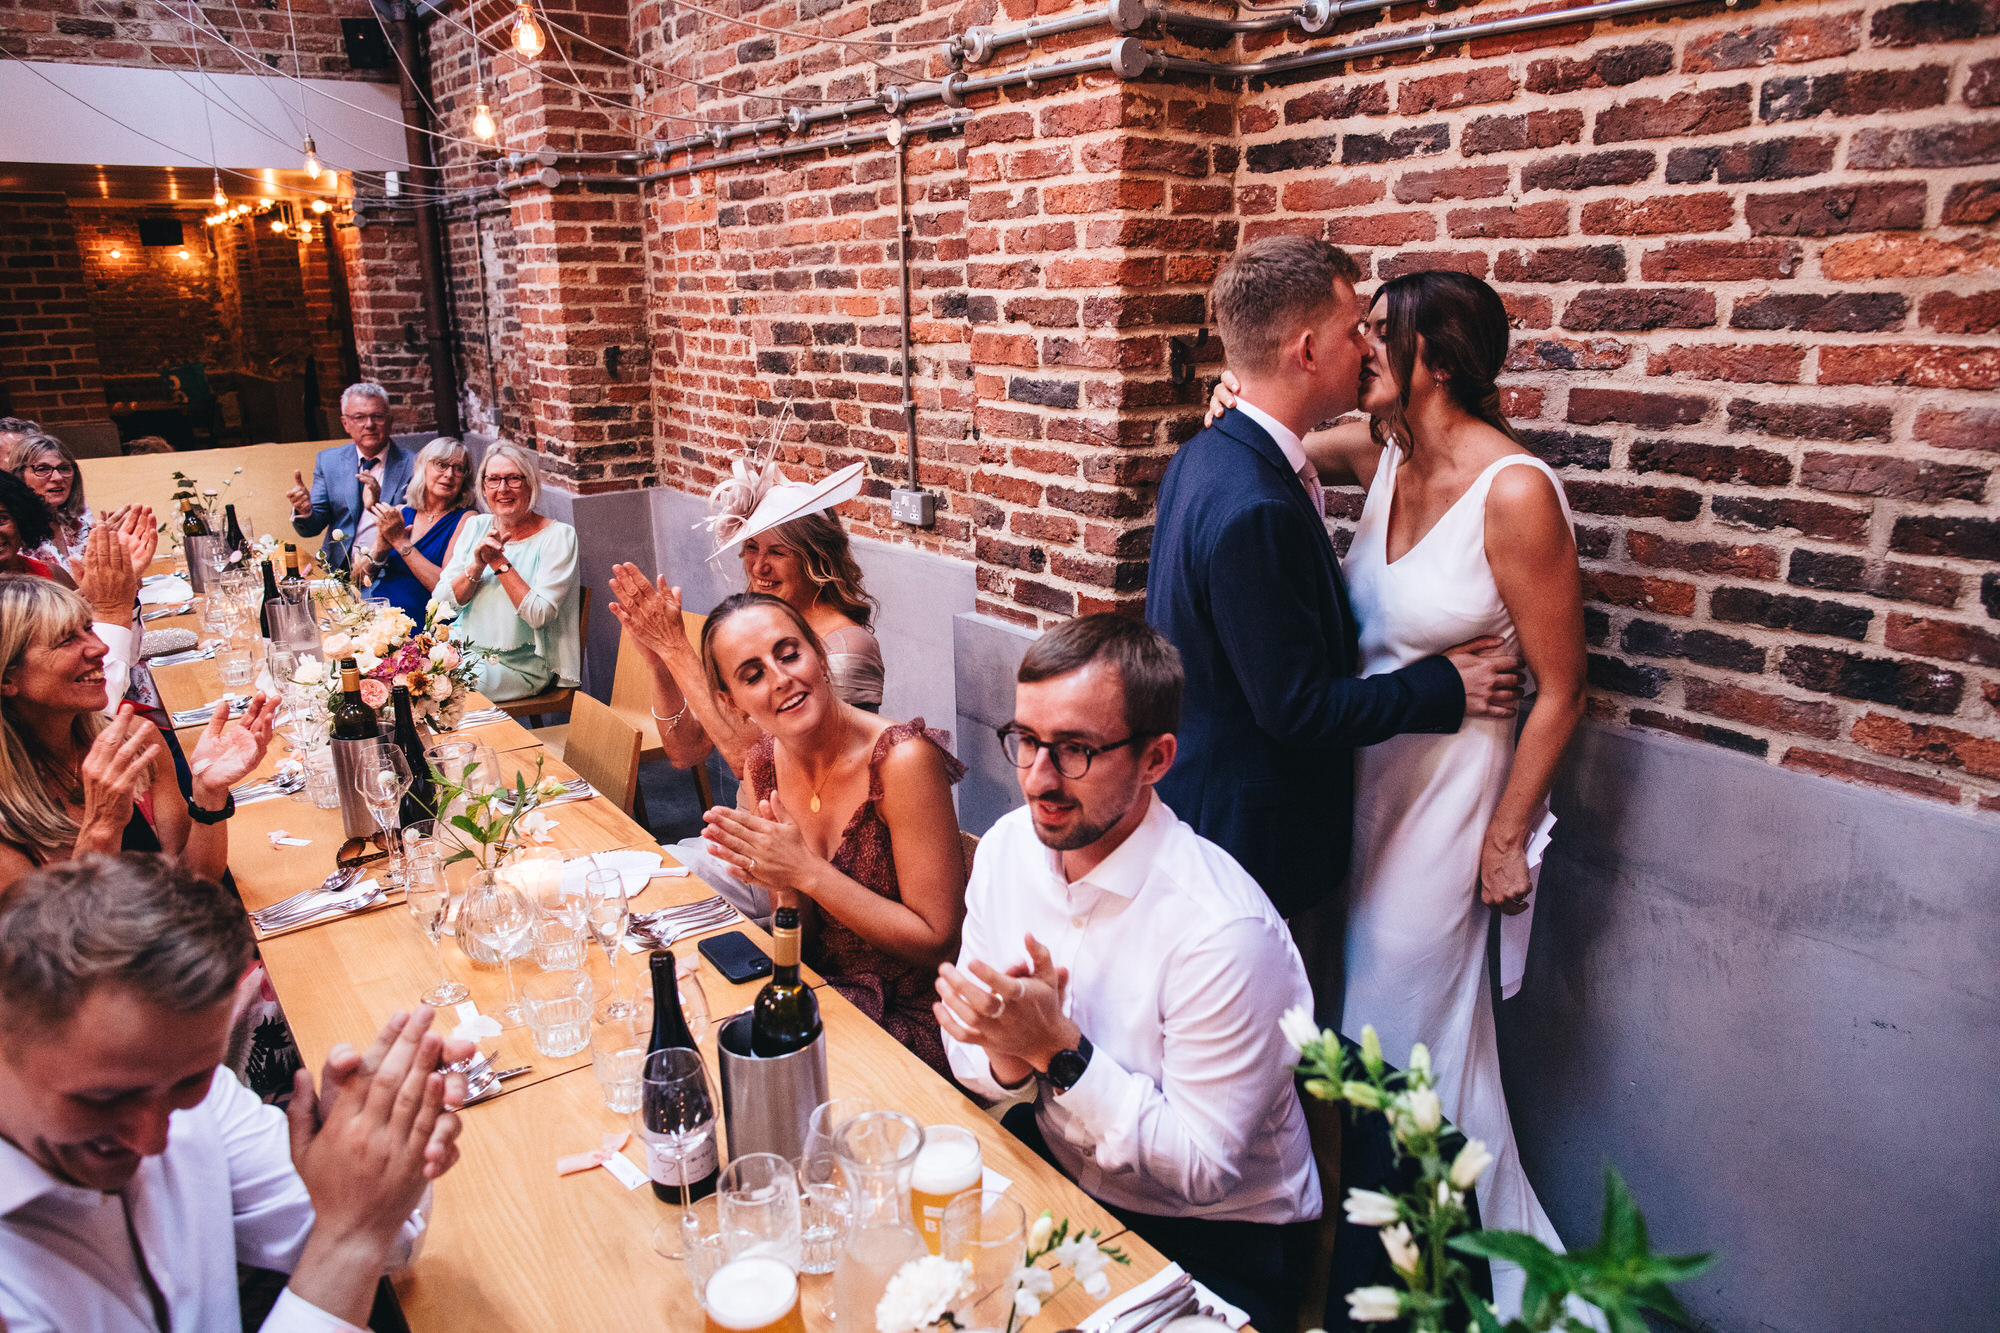 groom kissing bride at wedding reception in front of guests clapping